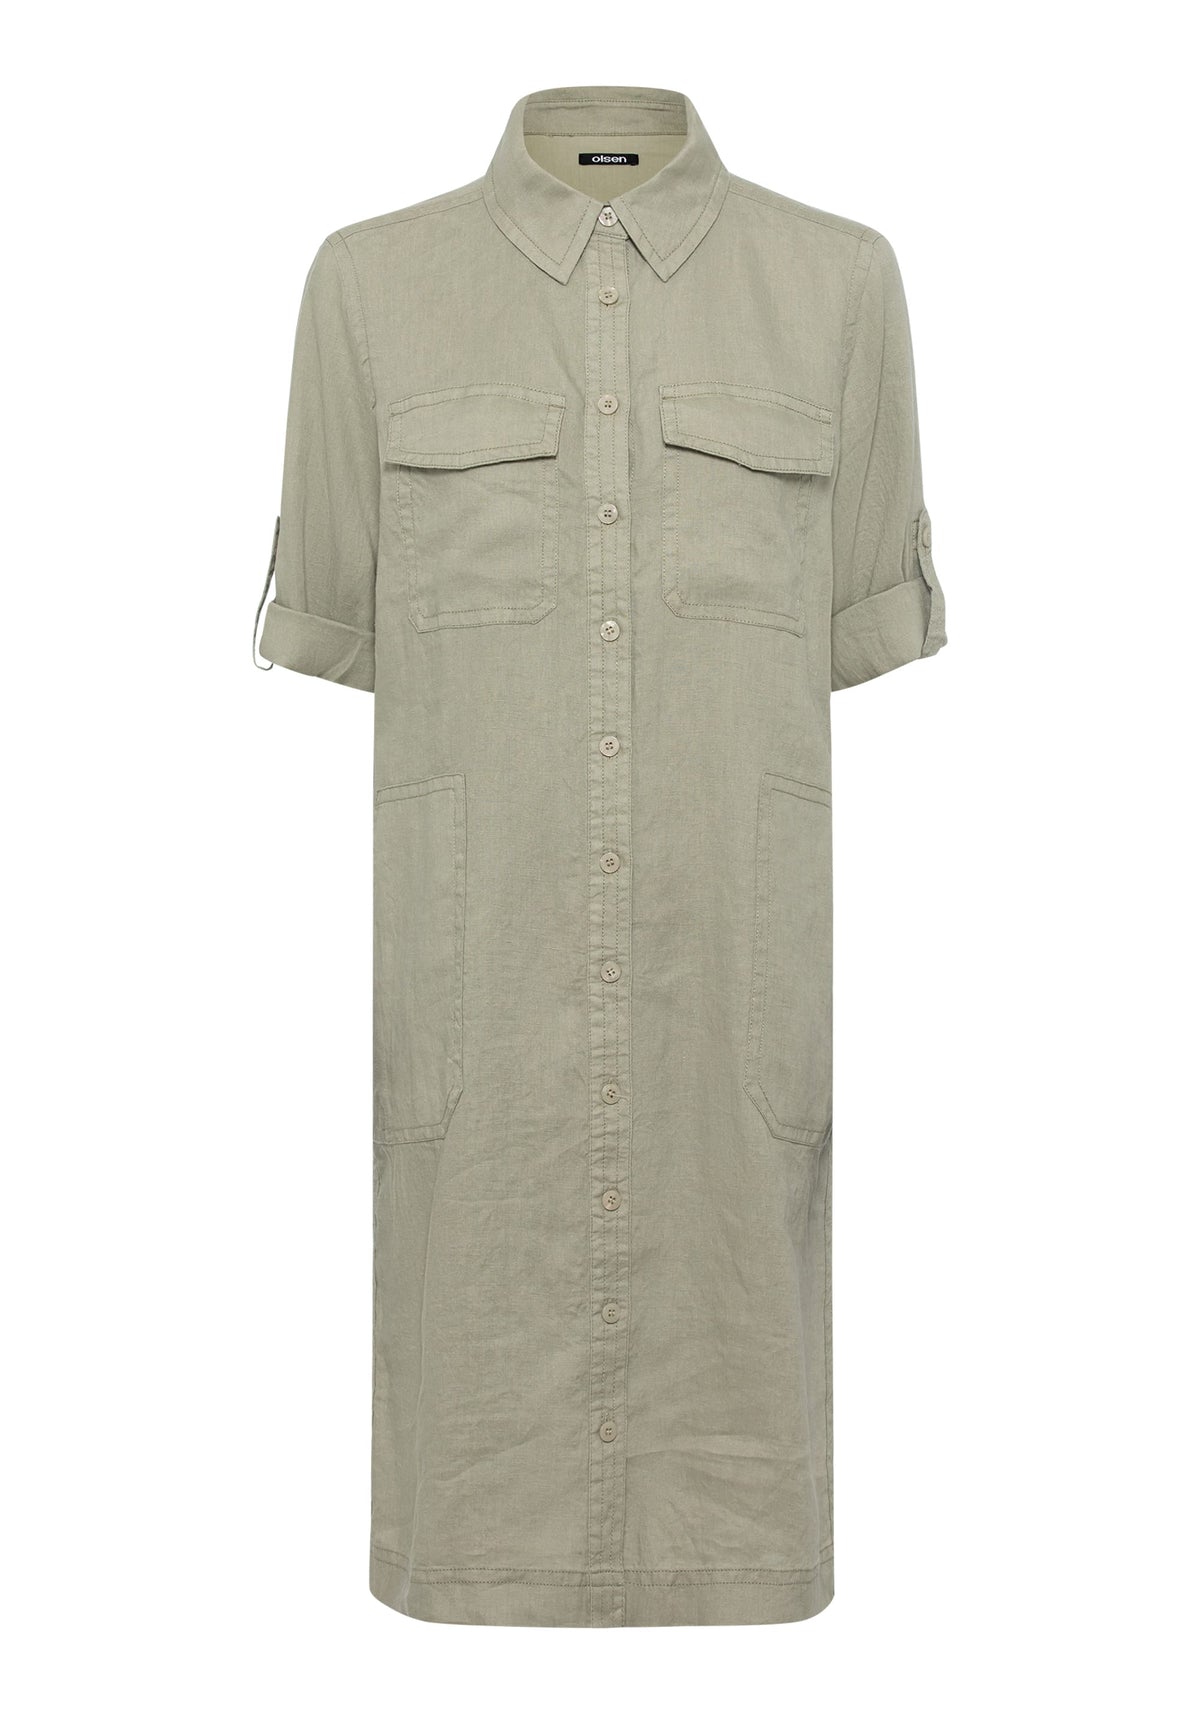 100% Linen 3/4 Sleeve Dress with Rolled Sleeve Tab Detail